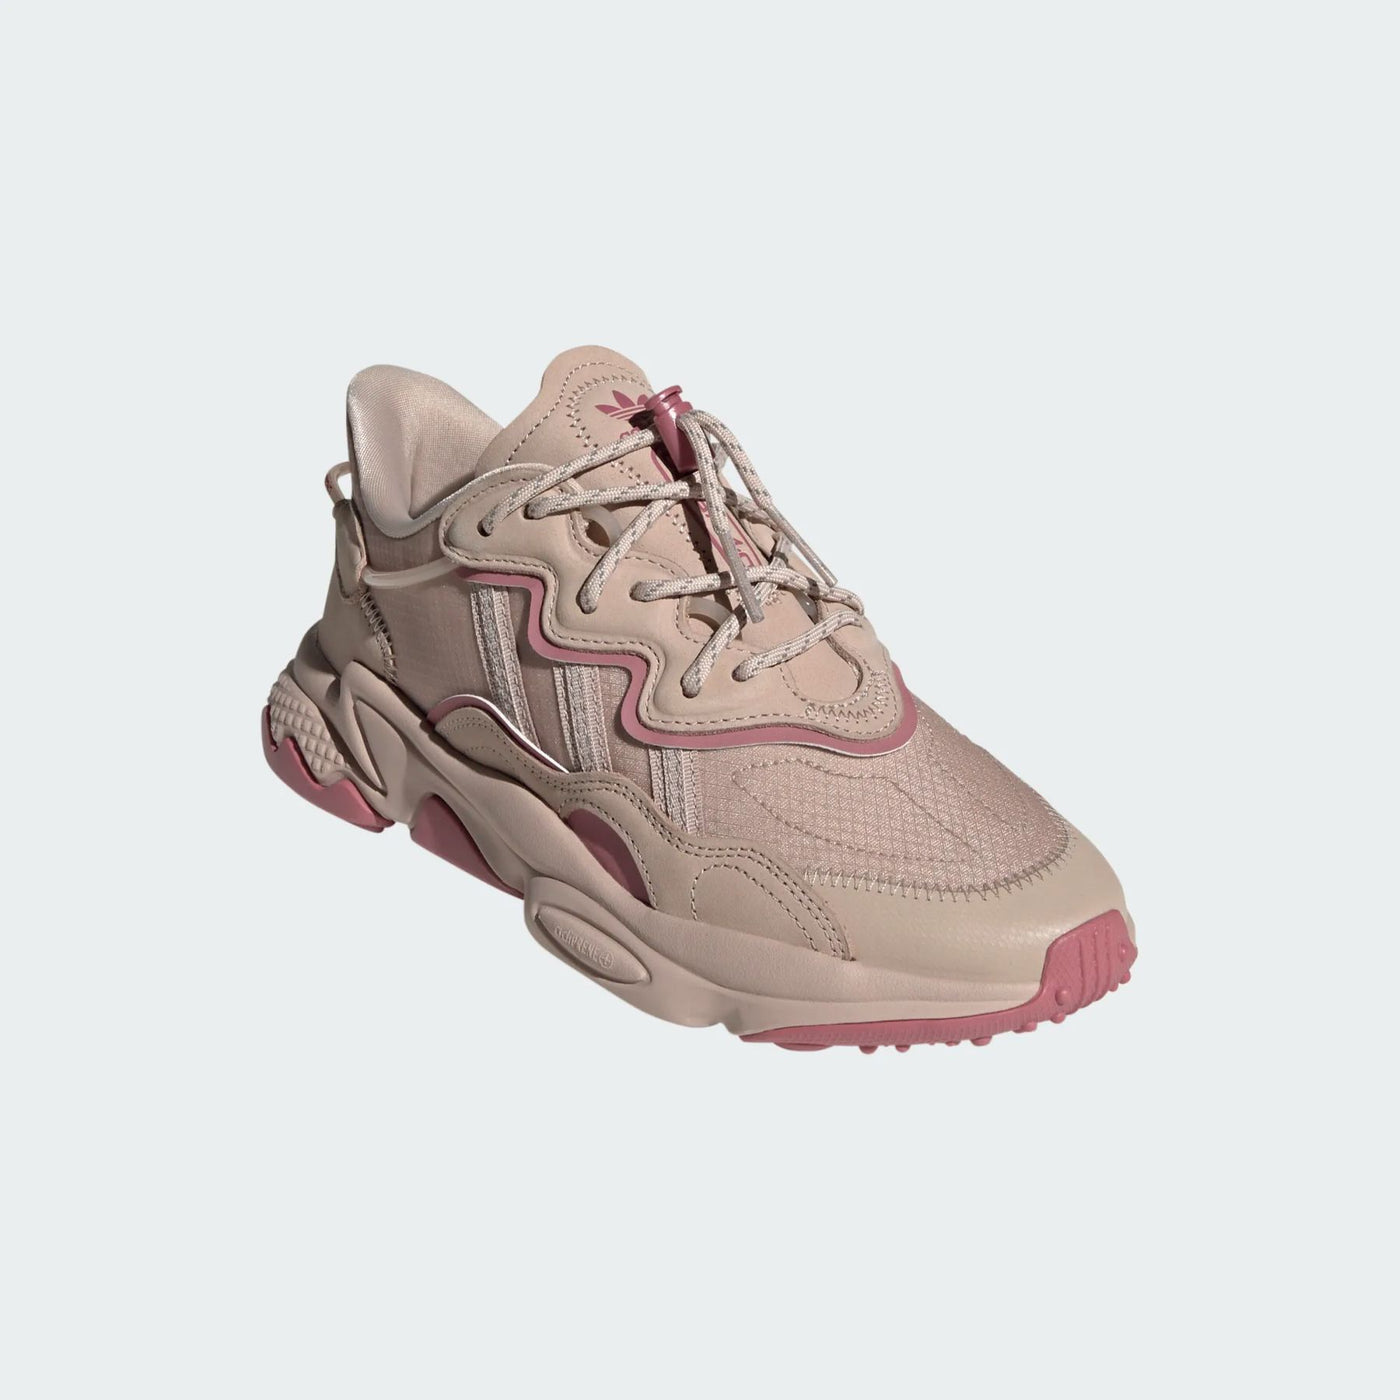 SNEAKERS ADIDAS OZWEEGO DONNA